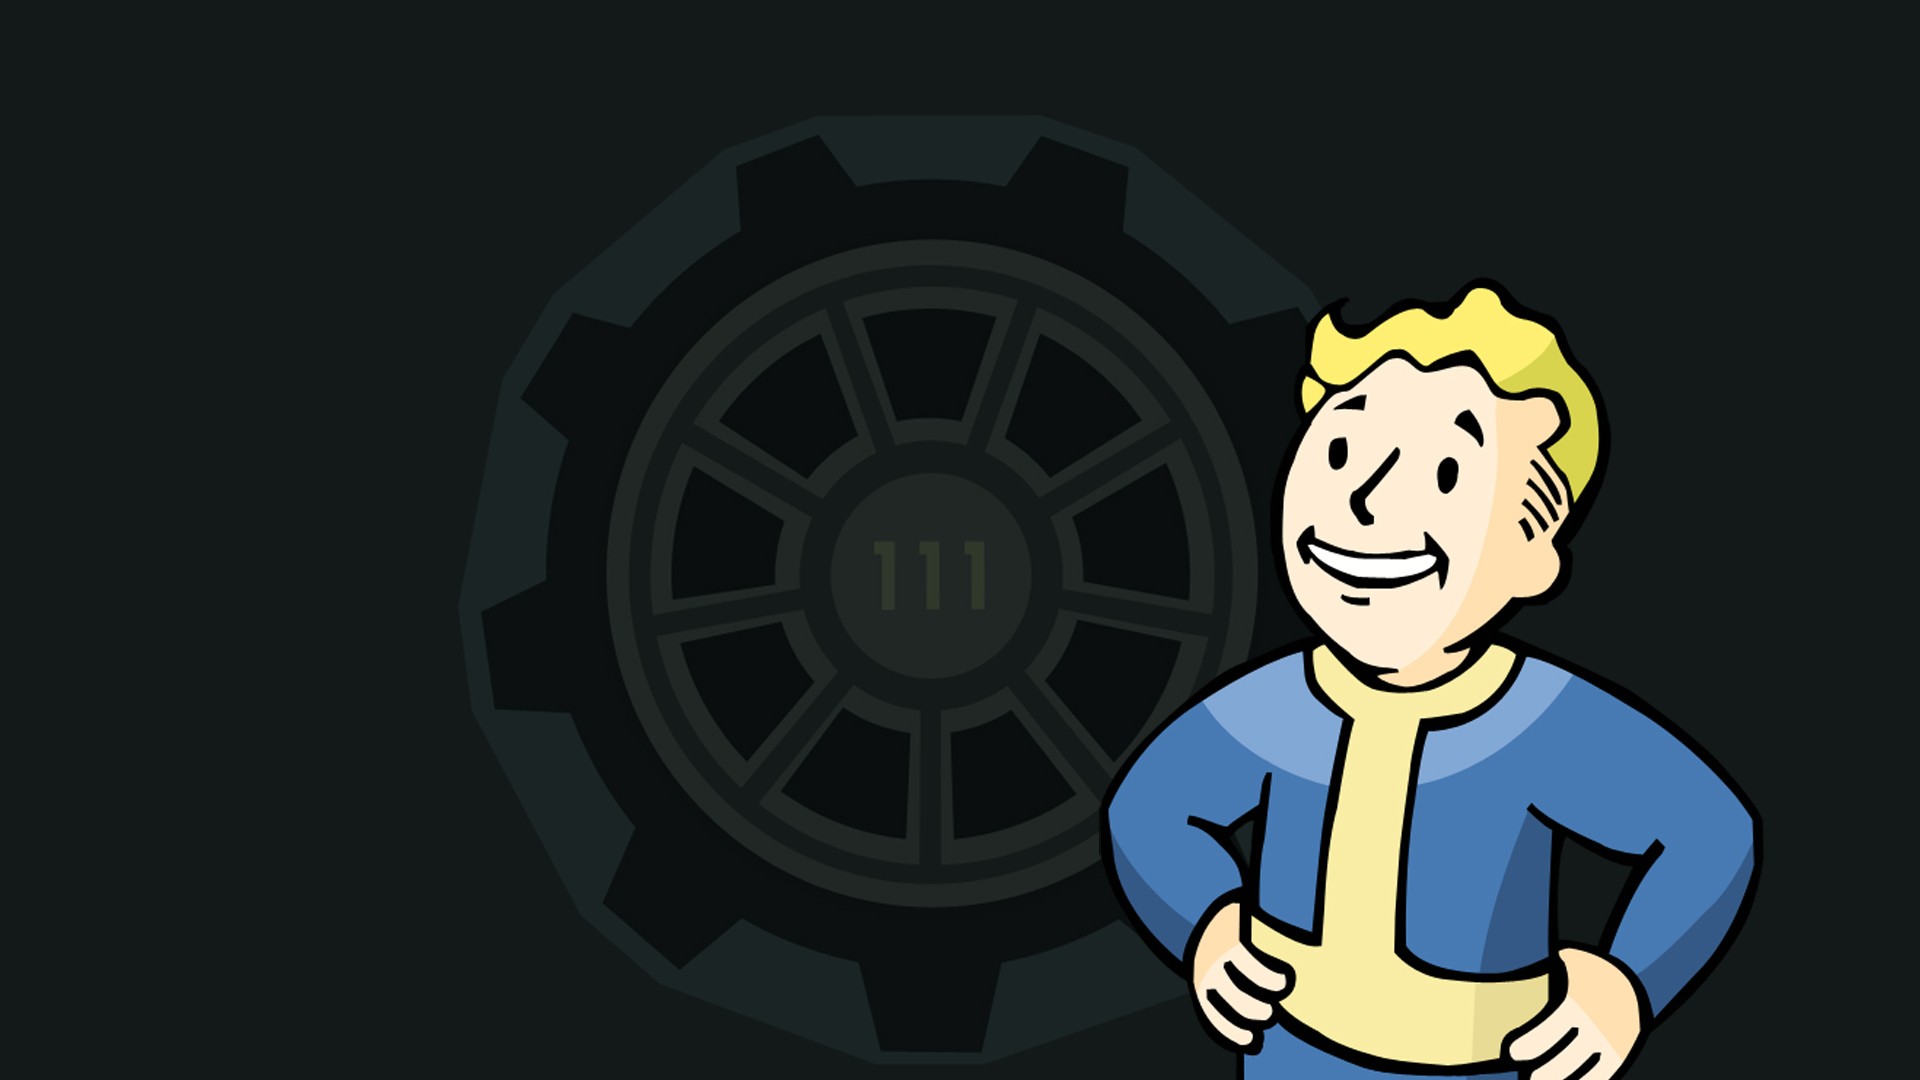 Fallout 4 Video Games Vault 111 Vault Boy Fallout Bethesda Softworks Apocalyptic 1920x1080